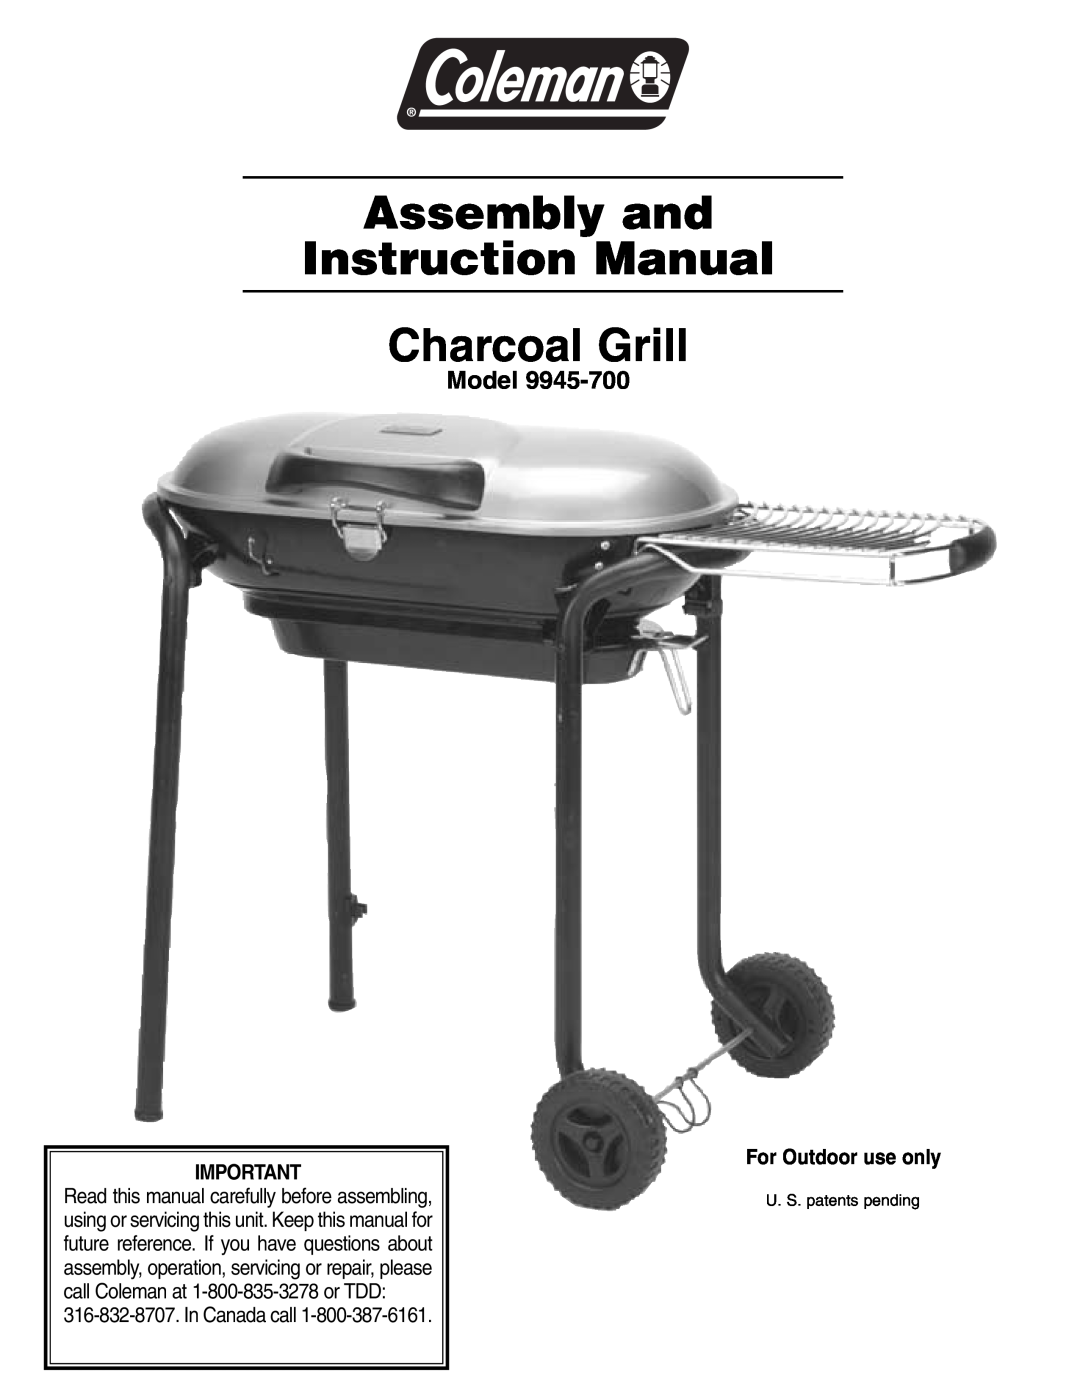 Coleman p9945-700 instruction manual Model, For Outdoor use only, Assembly and Instruction Manual Charcoal Grill 